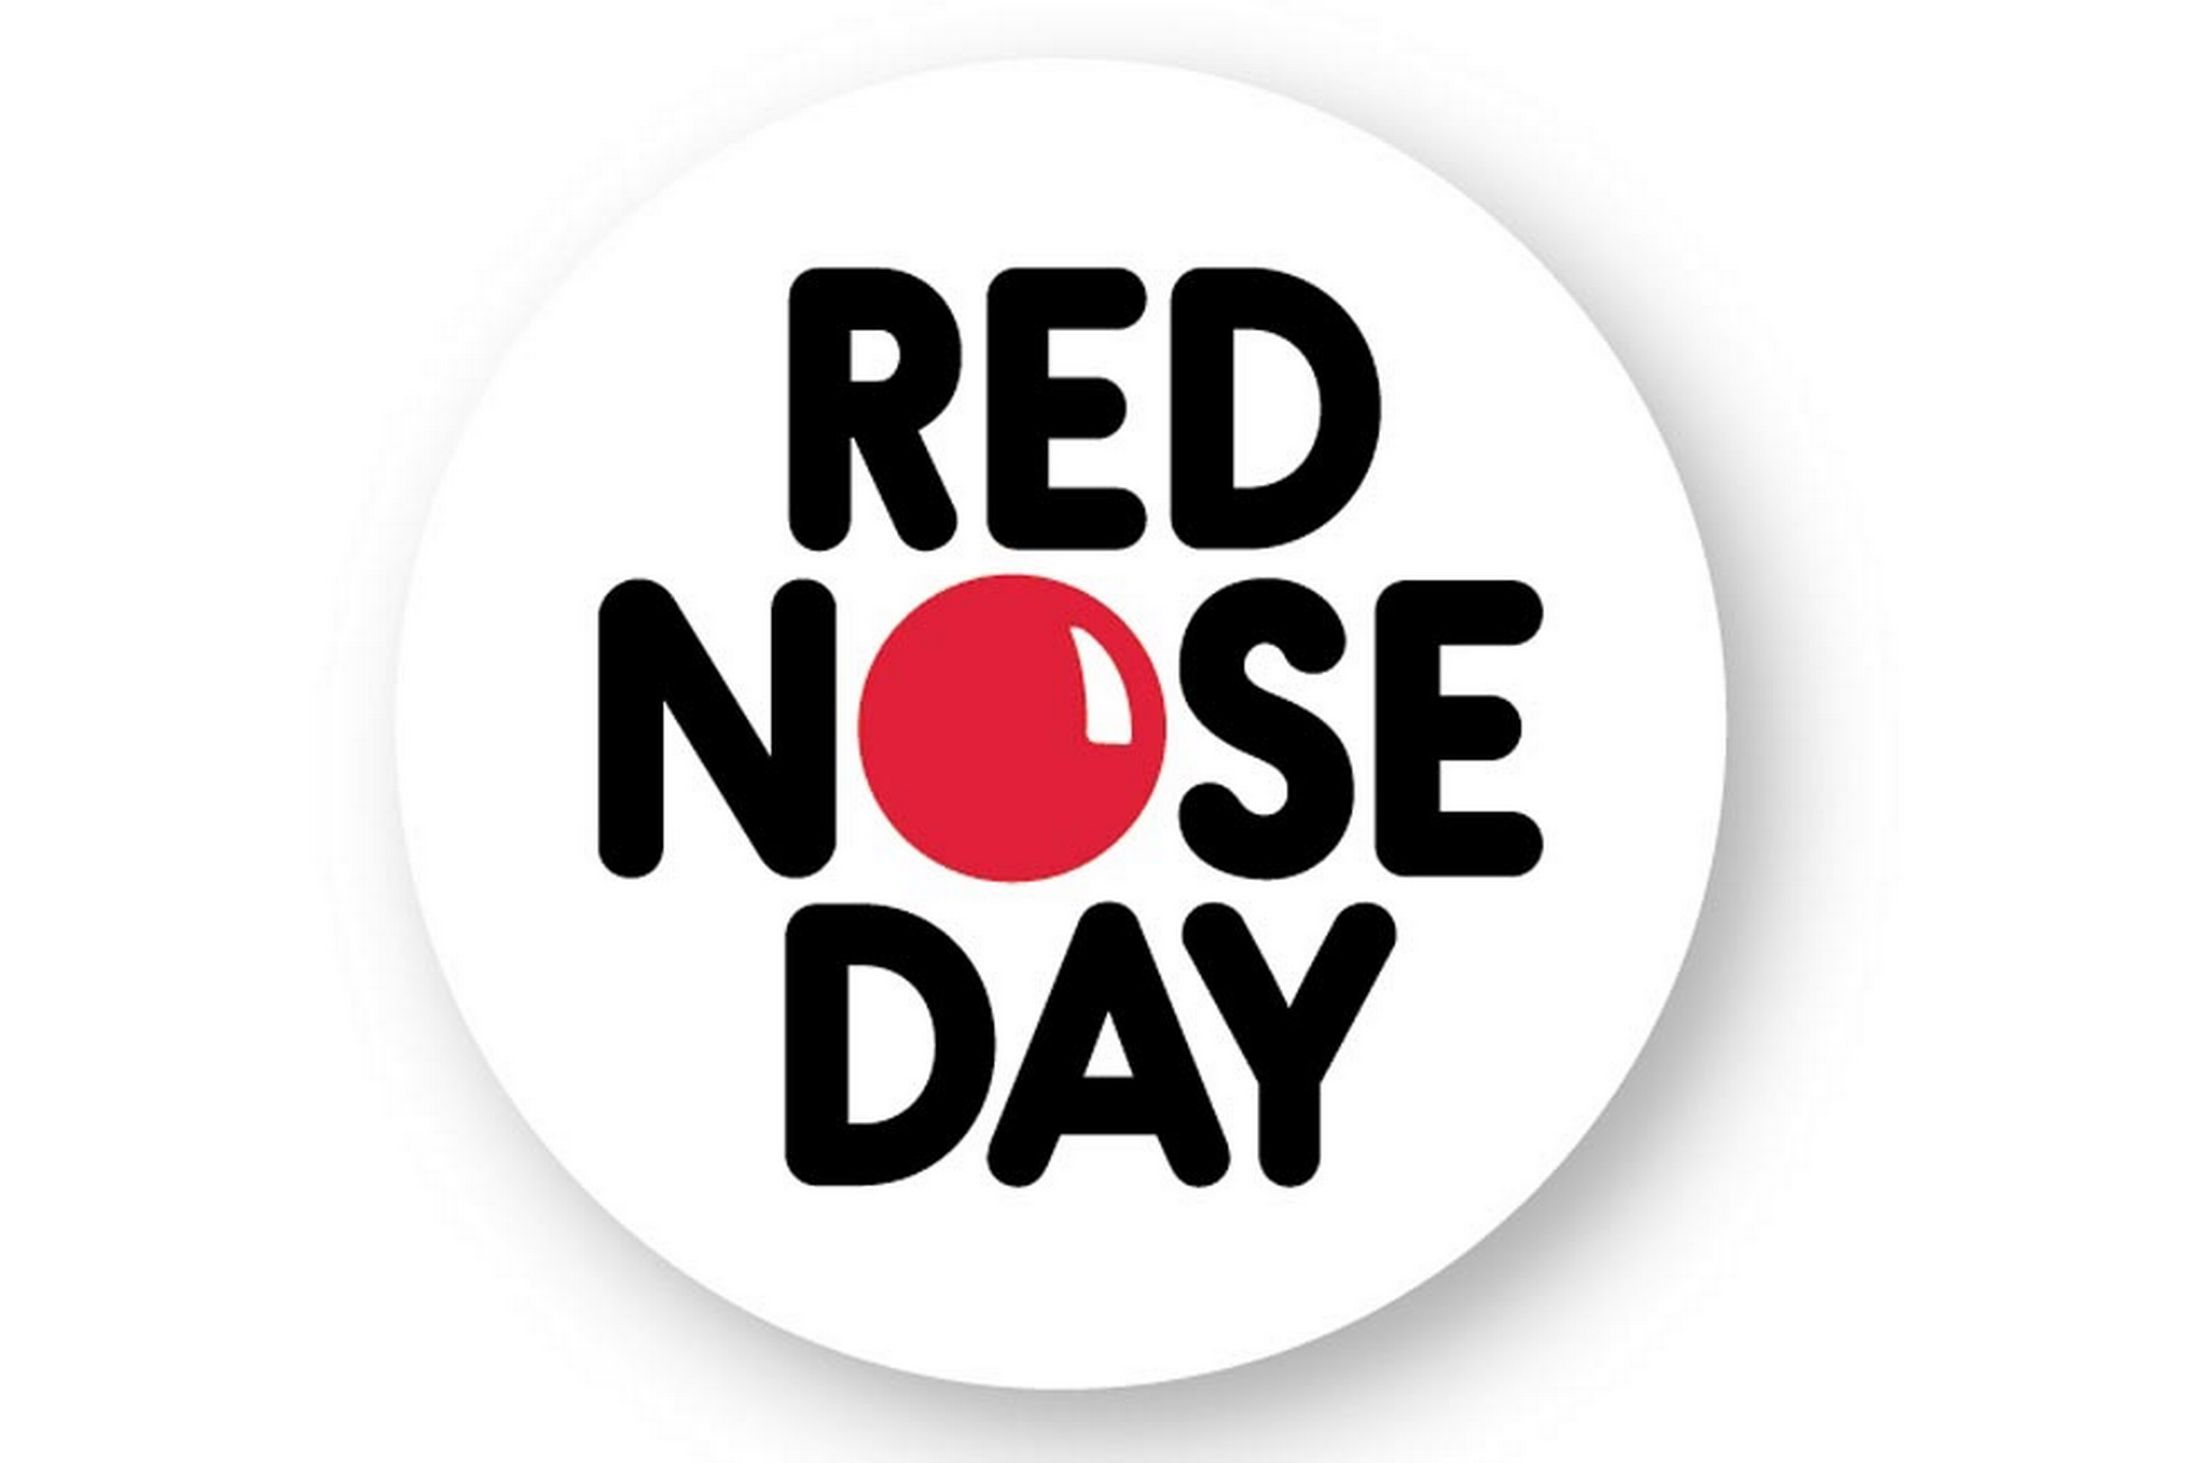 10 Amazing Facts About Comic Relief's Red Nose Day The List Love